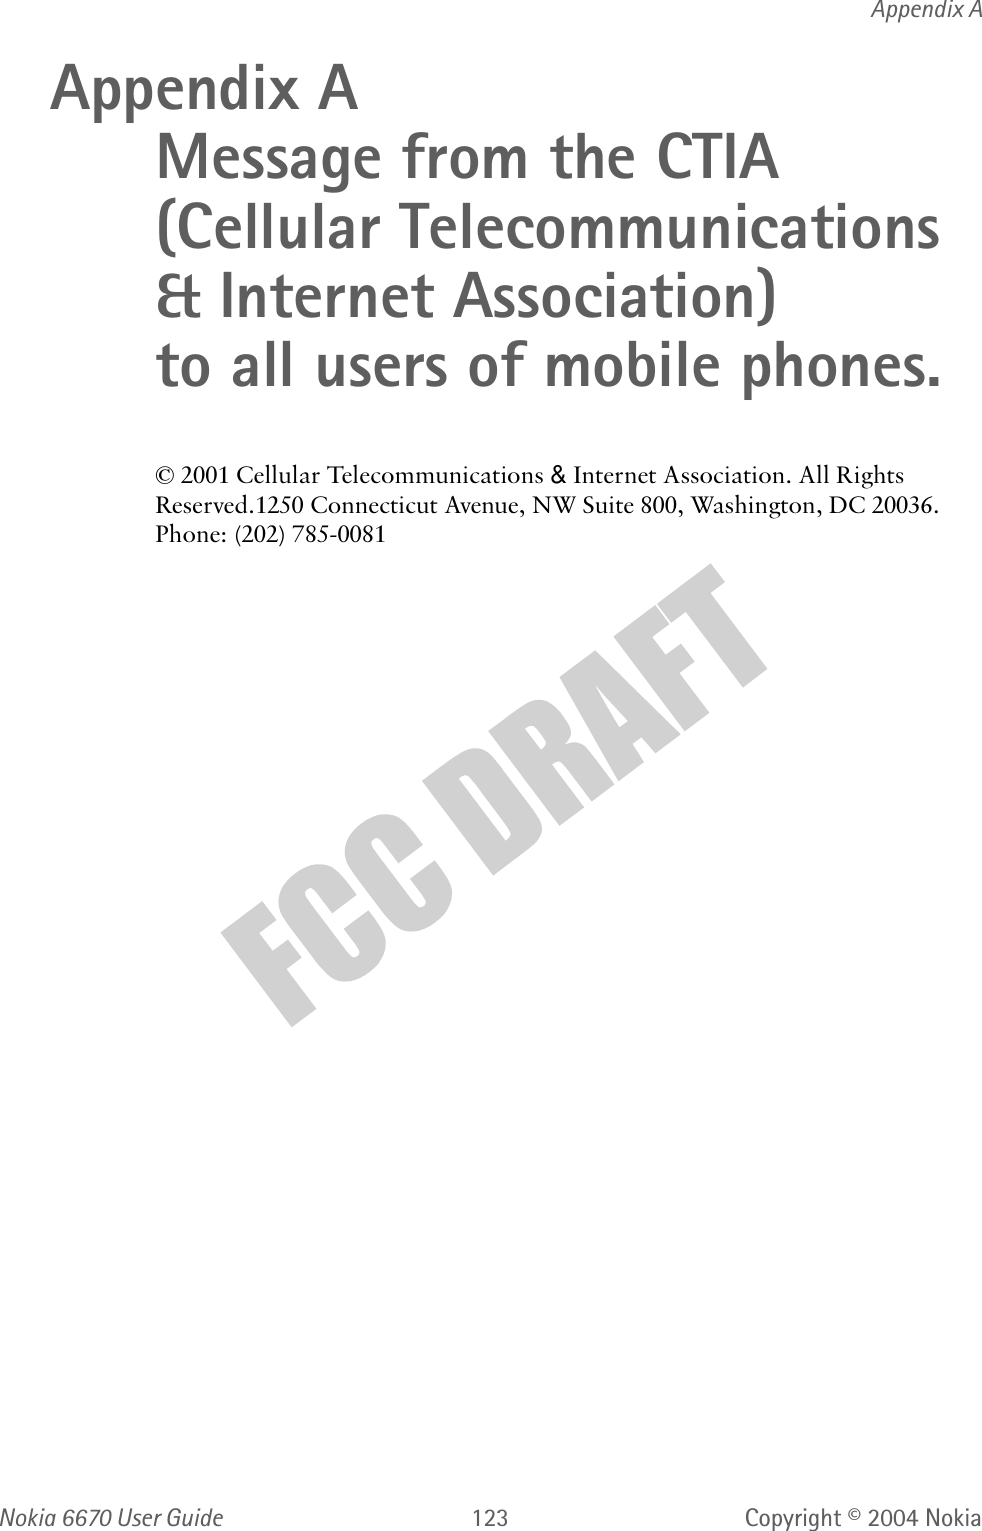 Nokia  User Guide  Copyright © 2004 NokiaAppendix AAppendix A Message from the CTIA(Cellular Telecommunications &amp; Internet Association) to all users of mobile phones.&amp;HOOXODU7HOHFRPPXQLFDWLRQV&amp;,QWHUQHW$VVRFLDWLRQ$OO5LJKWV5HVHUYHG&amp;RQQHFWLFXW$YHQXH1:6XLWH:DVKLQJWRQ&apos;&amp;3KRQH